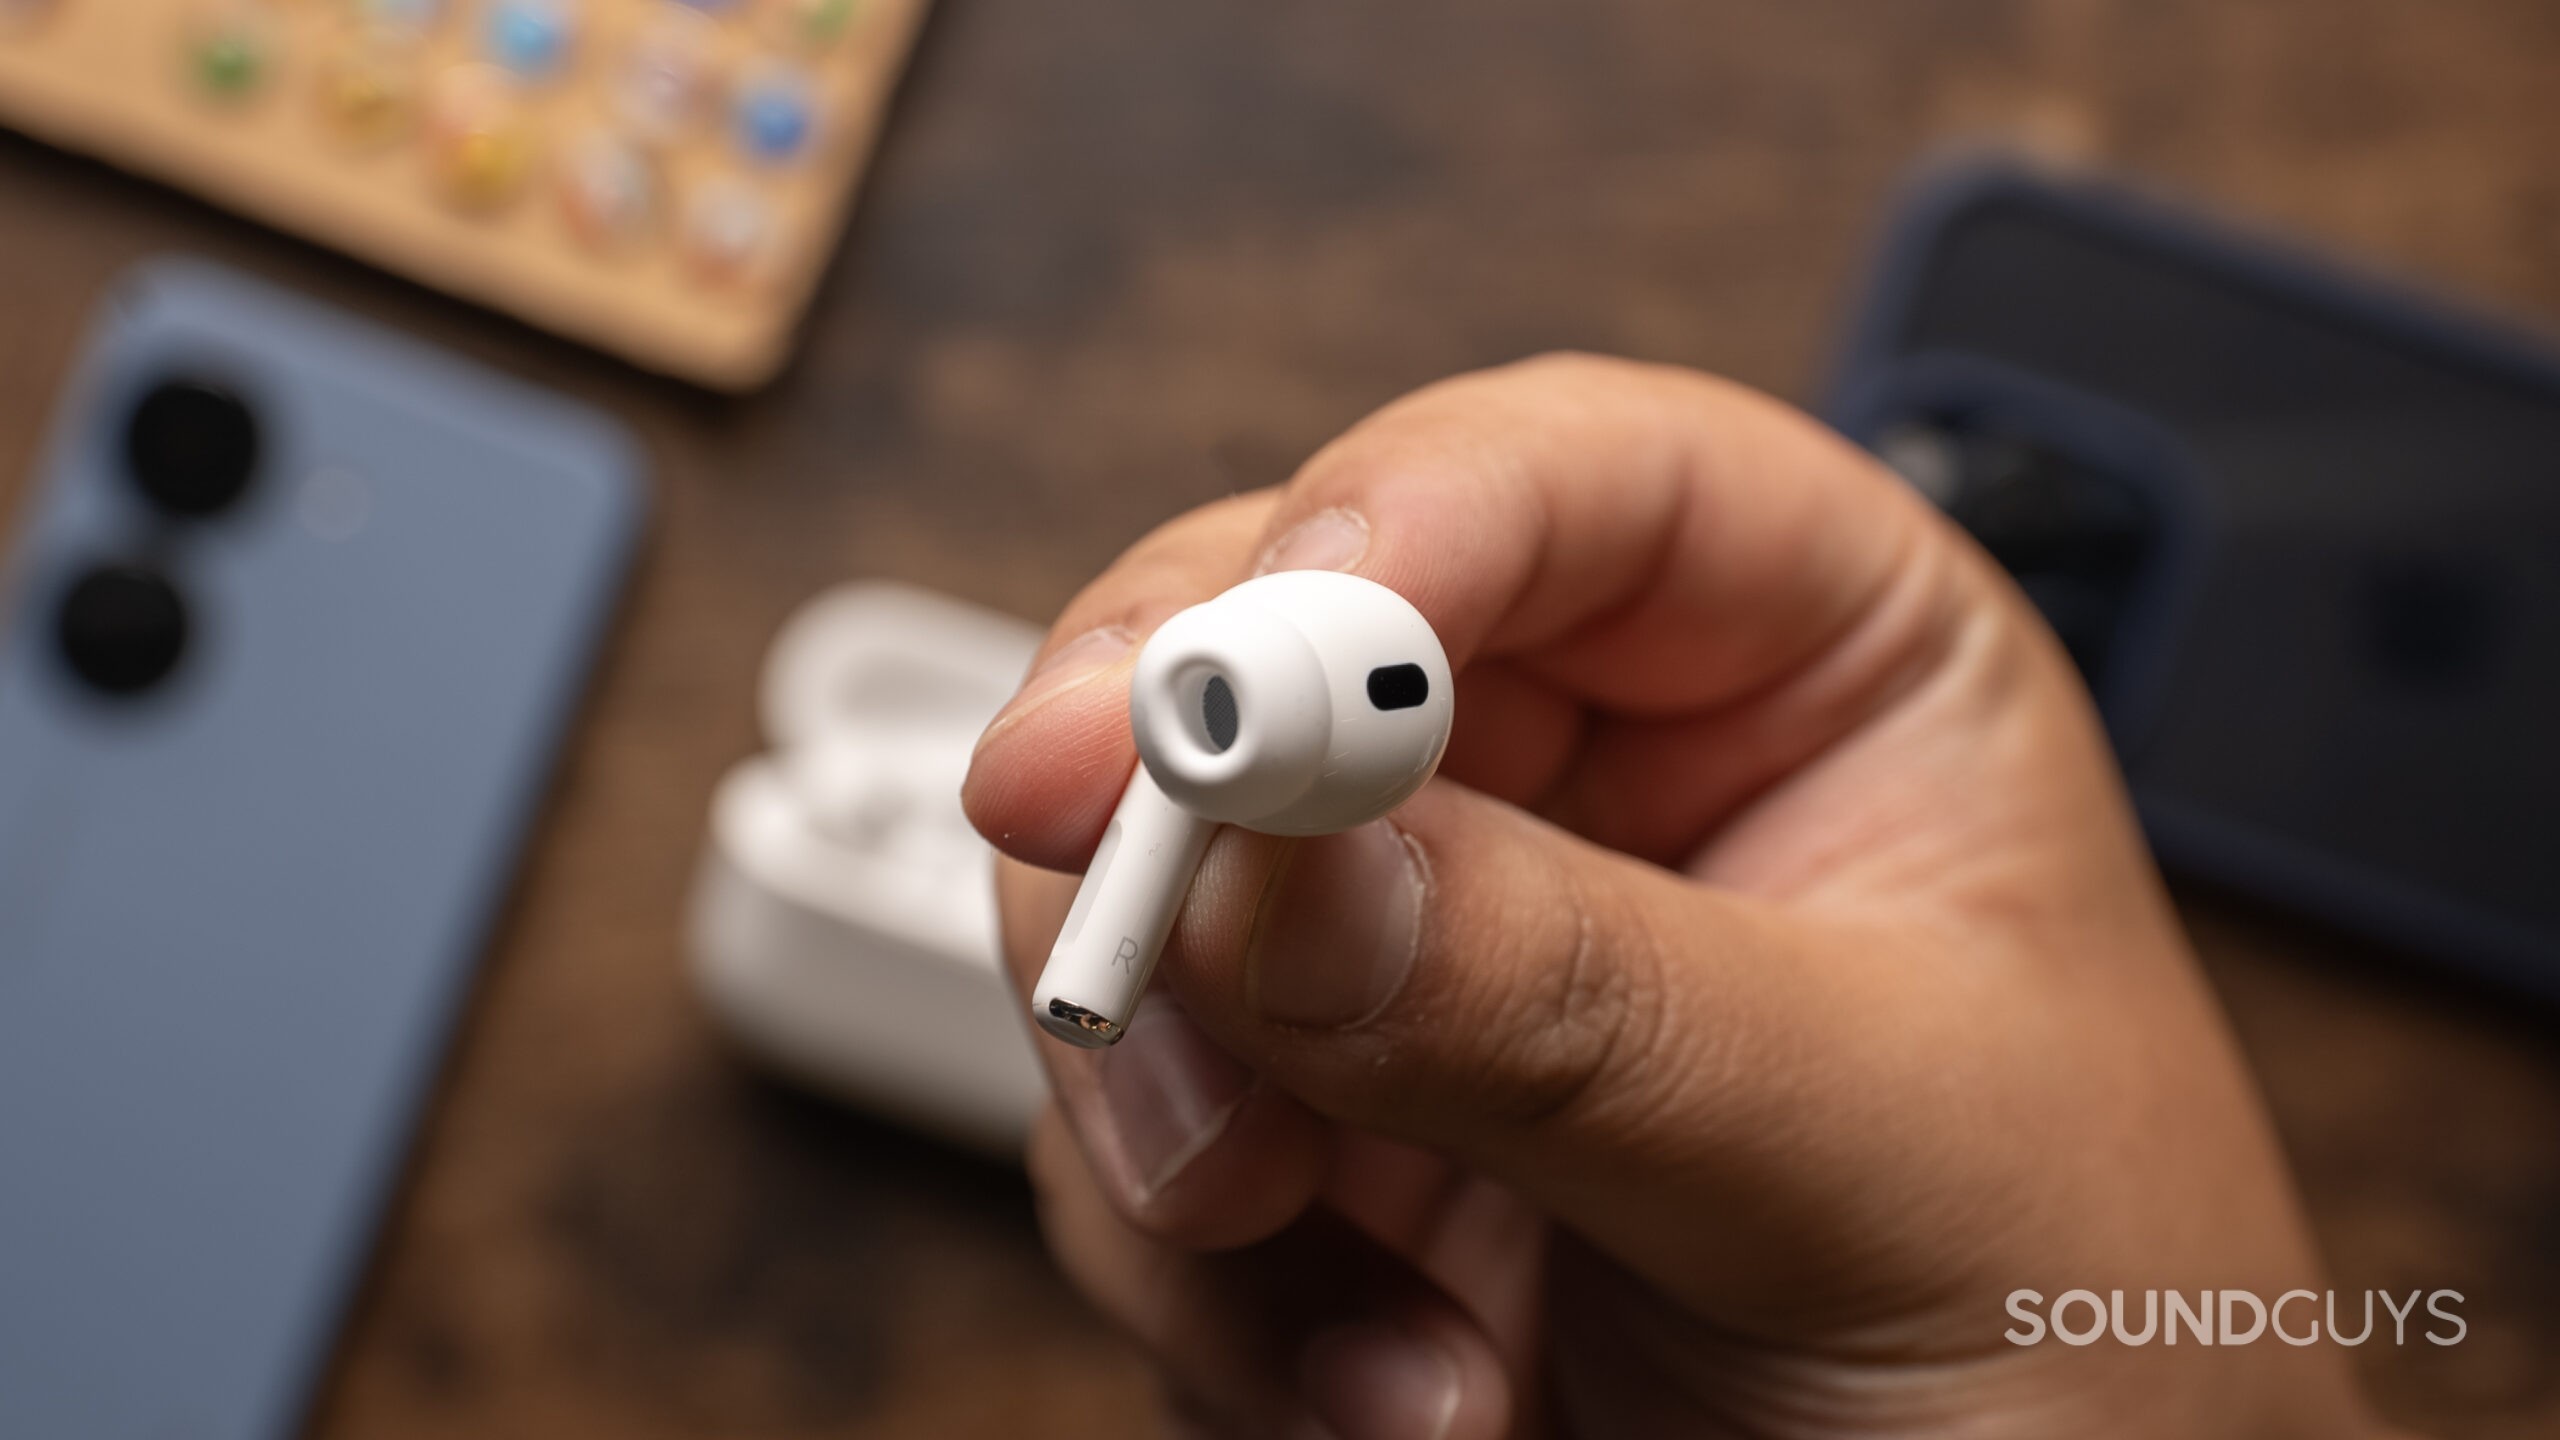 Apple AirPods Pro vs AirPods: Leave it to the Pro - SoundGuys